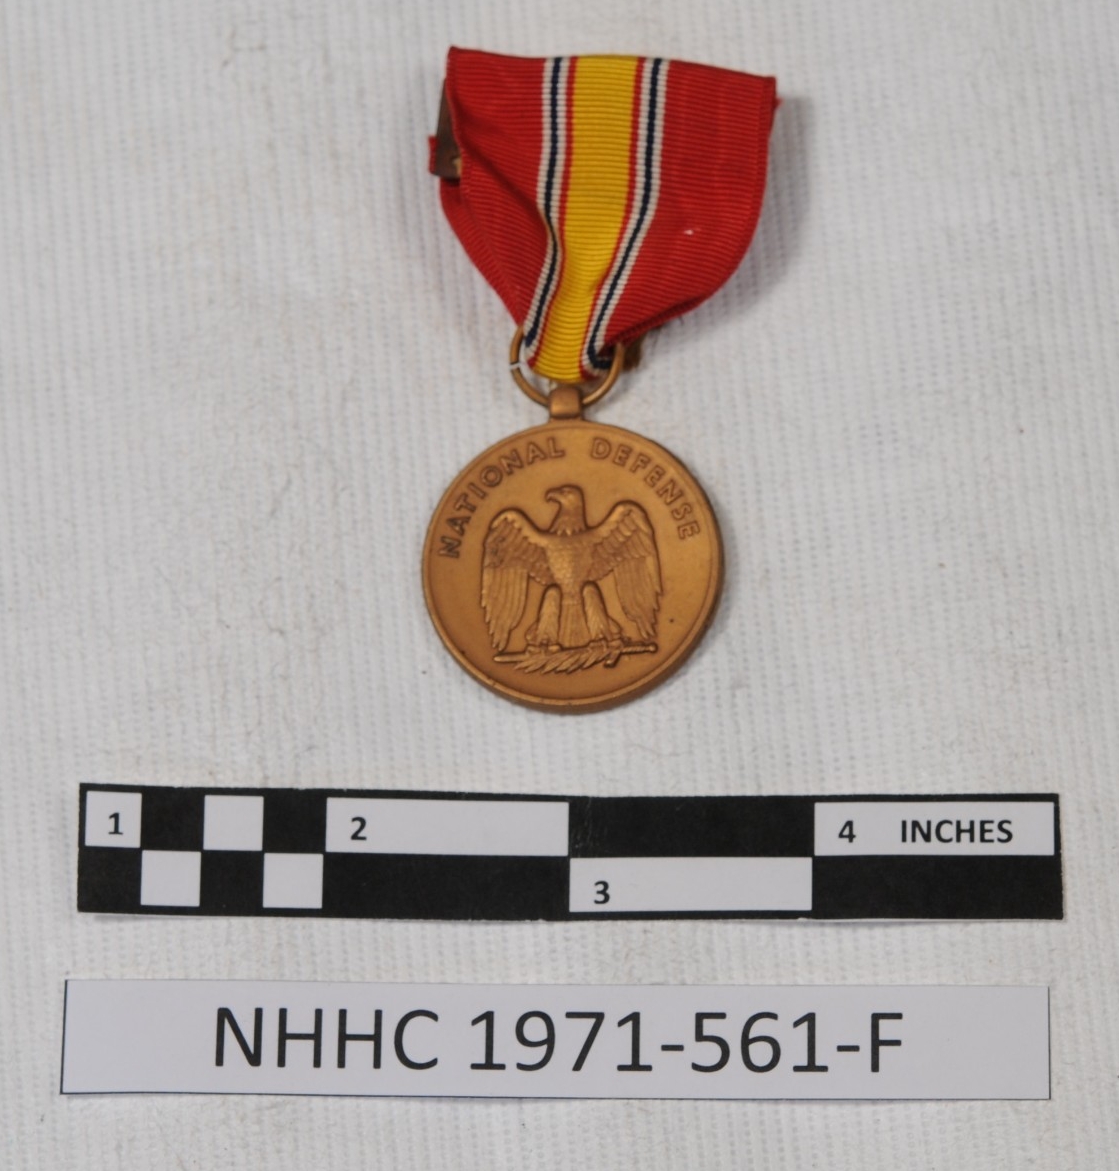 <p>One National Defense Service medal. The ribbon has the following vertical stripe color pattern: wide red, thin white, thin dark blue, thin white, thin red, thicker yellow, thin red, thin white, thin dark blue, thin white, wide red. There is a metal backer with a pin to attach the ribbon to a board. The bronze medal is circular. The obverse design has NATIONAL DEFENSE across the top above an eagle with outstretched wings, standing on a sword and a palm branch. </p>
